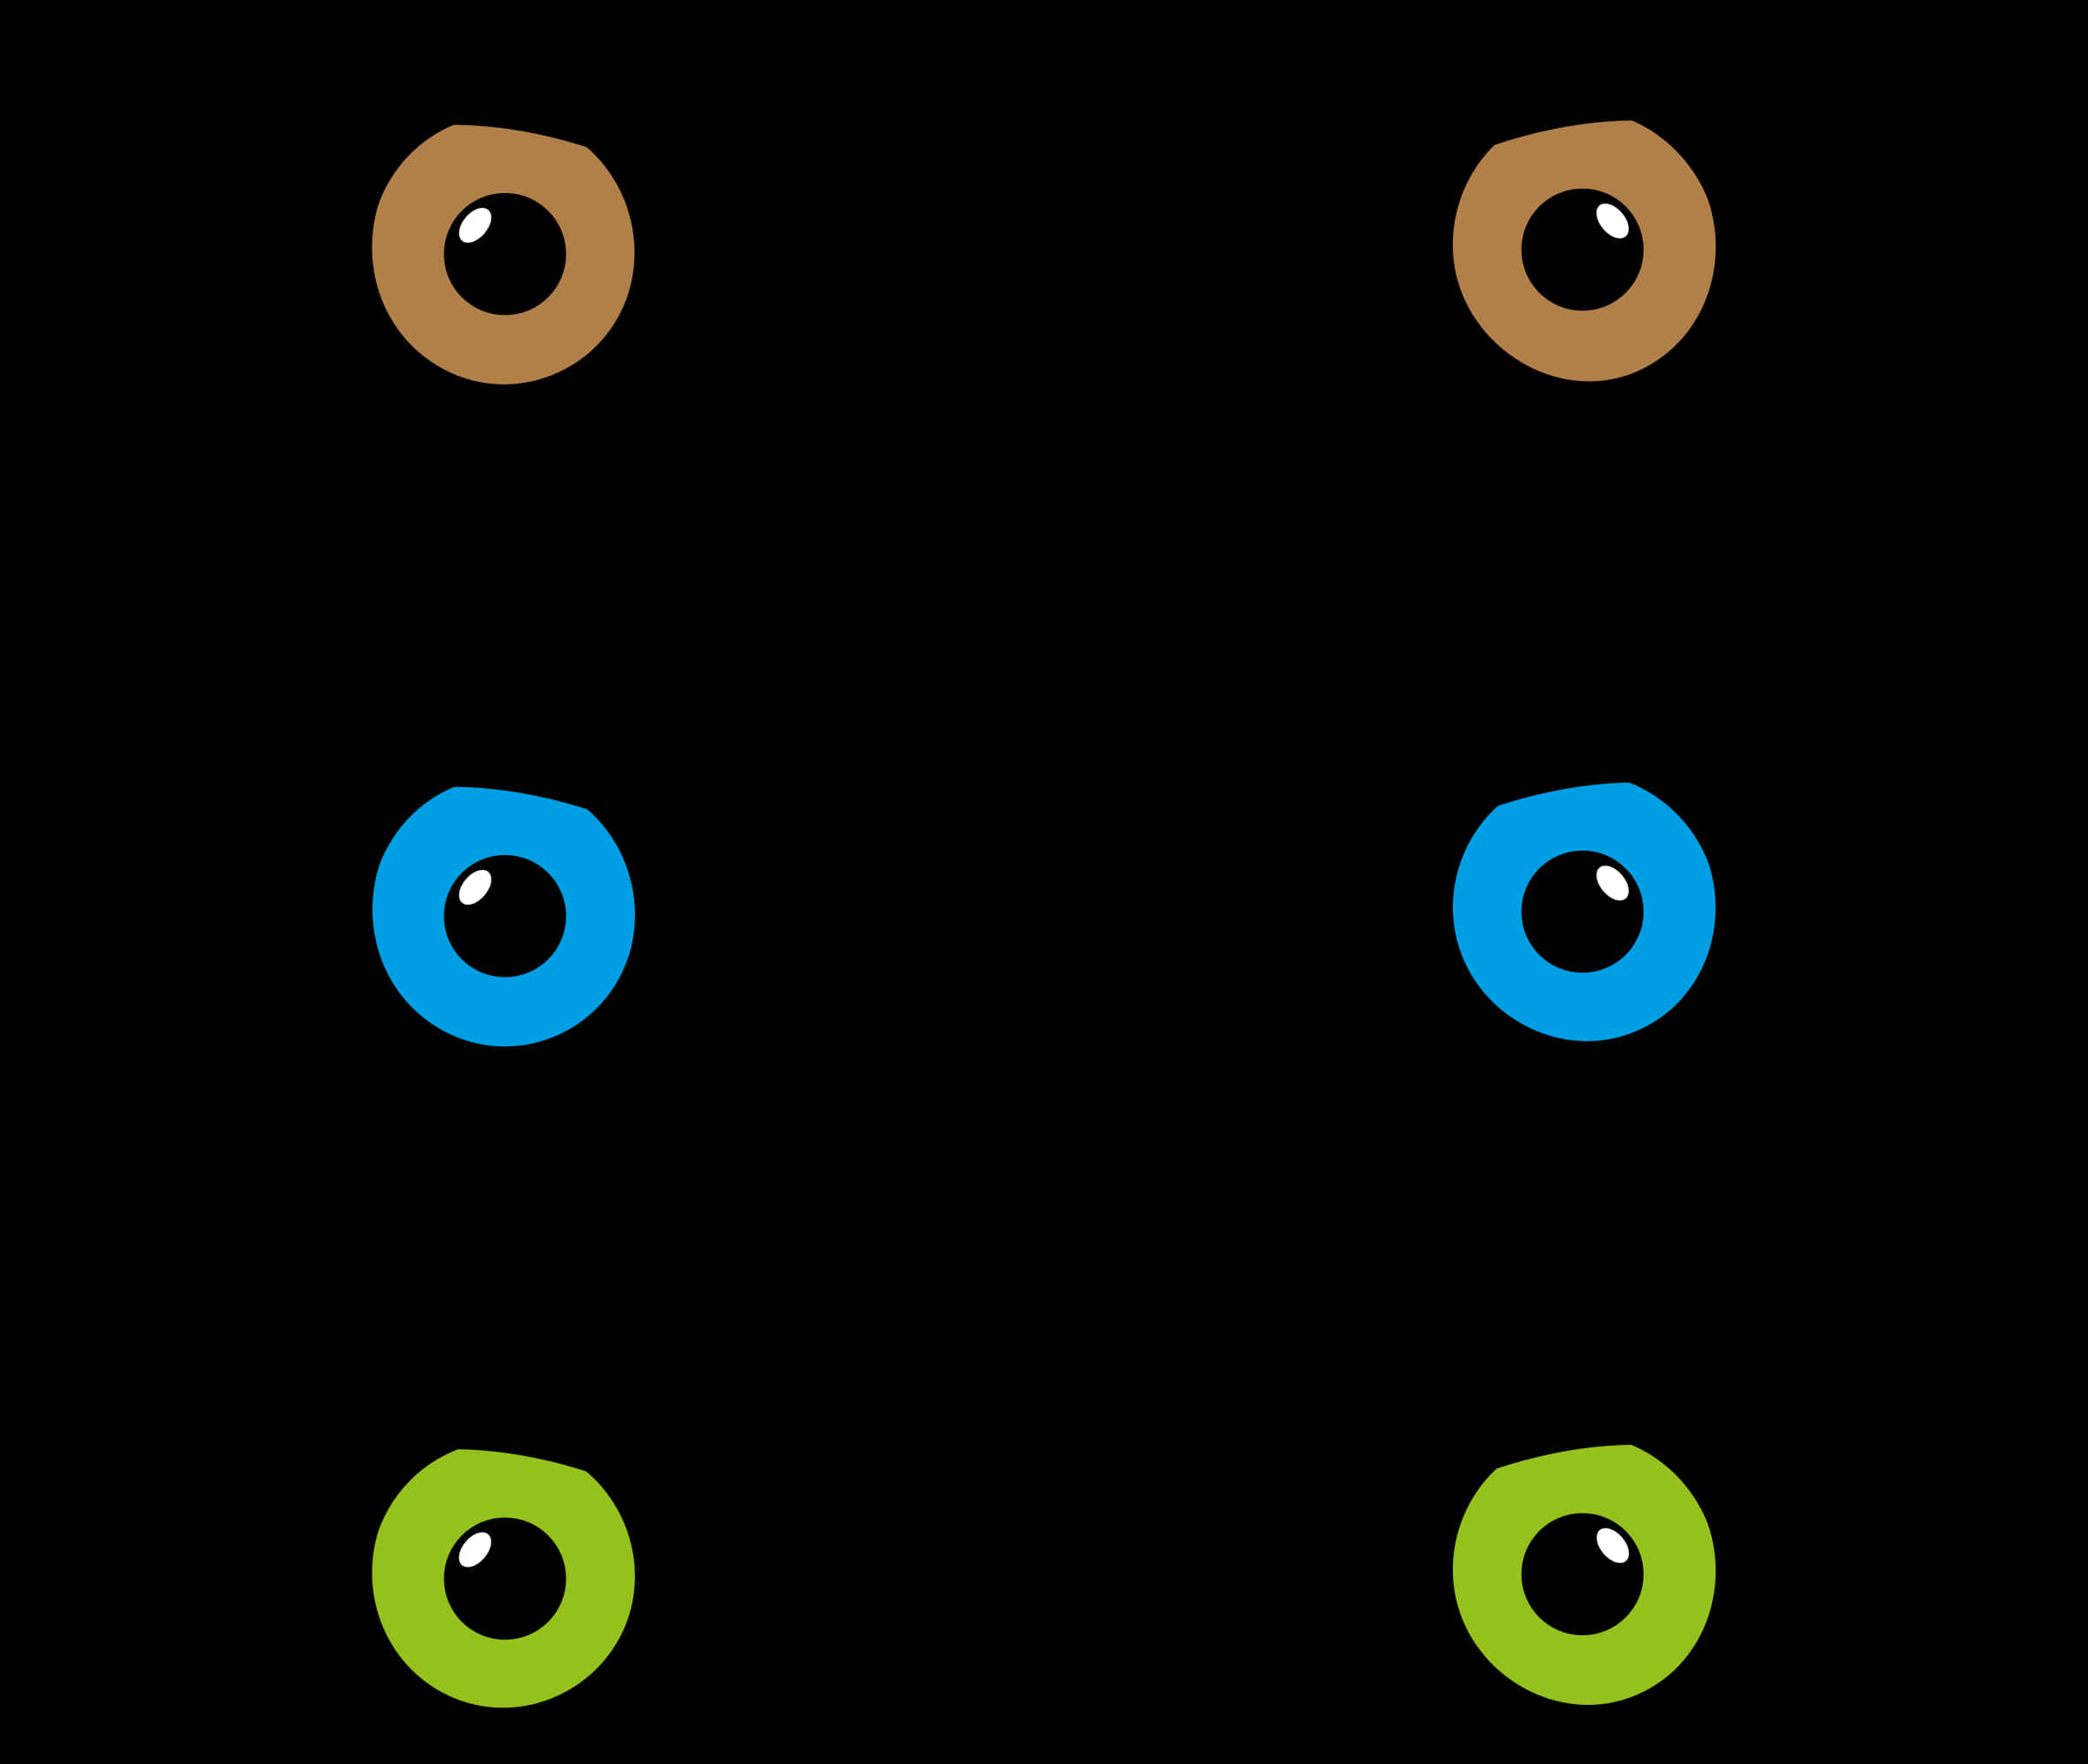 A Group Of Eyes On A Black Background